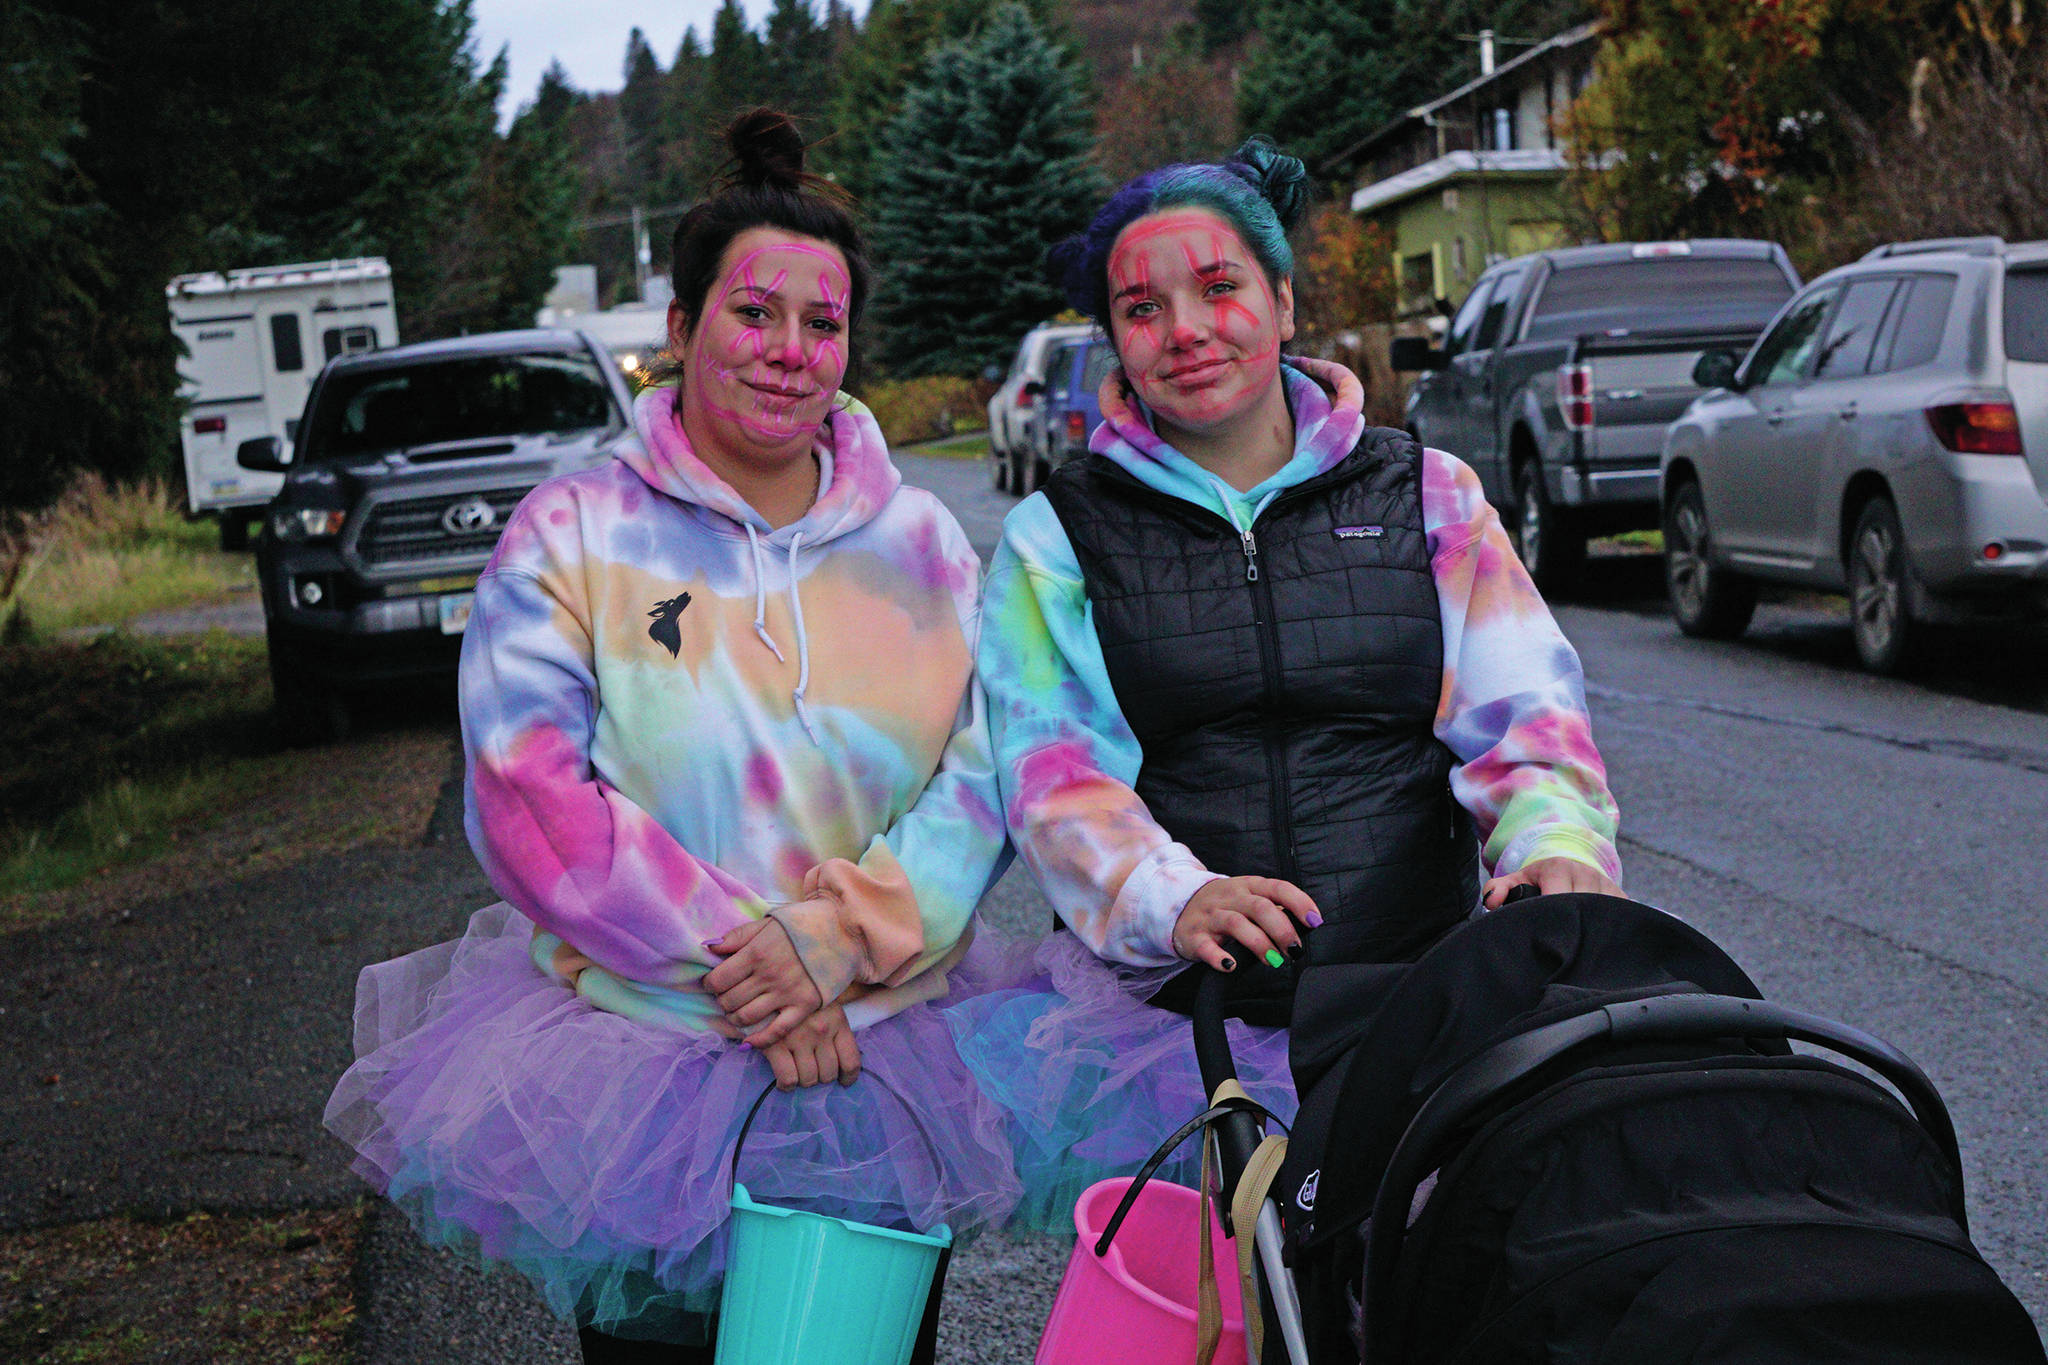 Kristi and Kylie Cortez were part of a group of Halloween trick-or-treaters walking down Bayview Avenue, on Oct. 31, 2019, in Homer, Alaska. Bayview Avenue and Mountainview Avenue were one-way for the night to minimize traffic. (Photo by Michael Armstrong/Homer News)